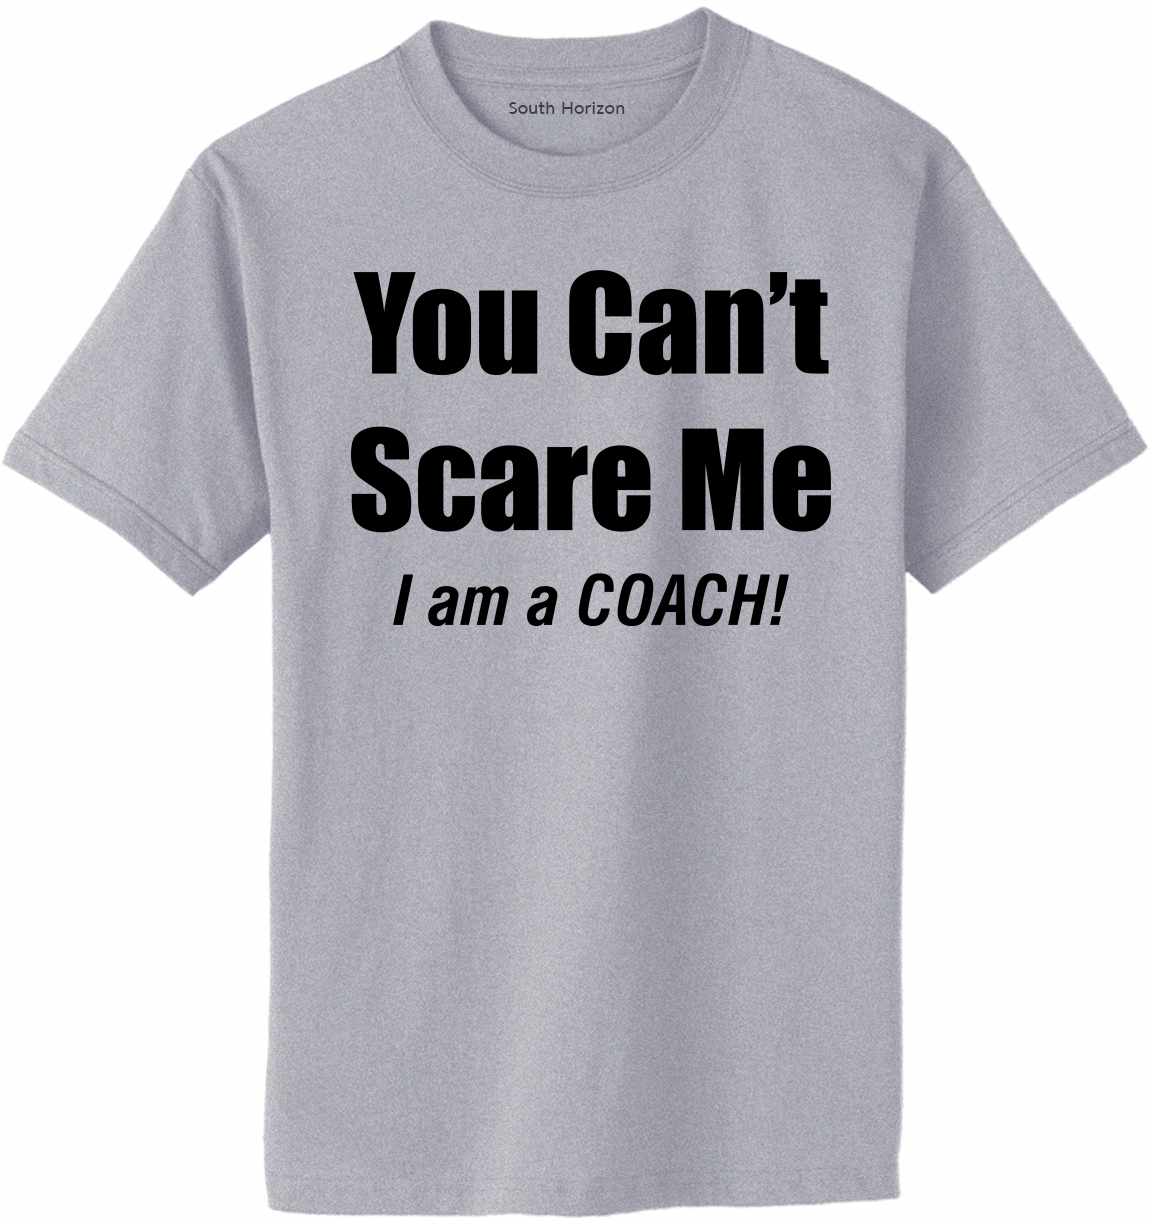 You Can't Scare Me, I'm a COACH Adult T-Shirt (#946-1)